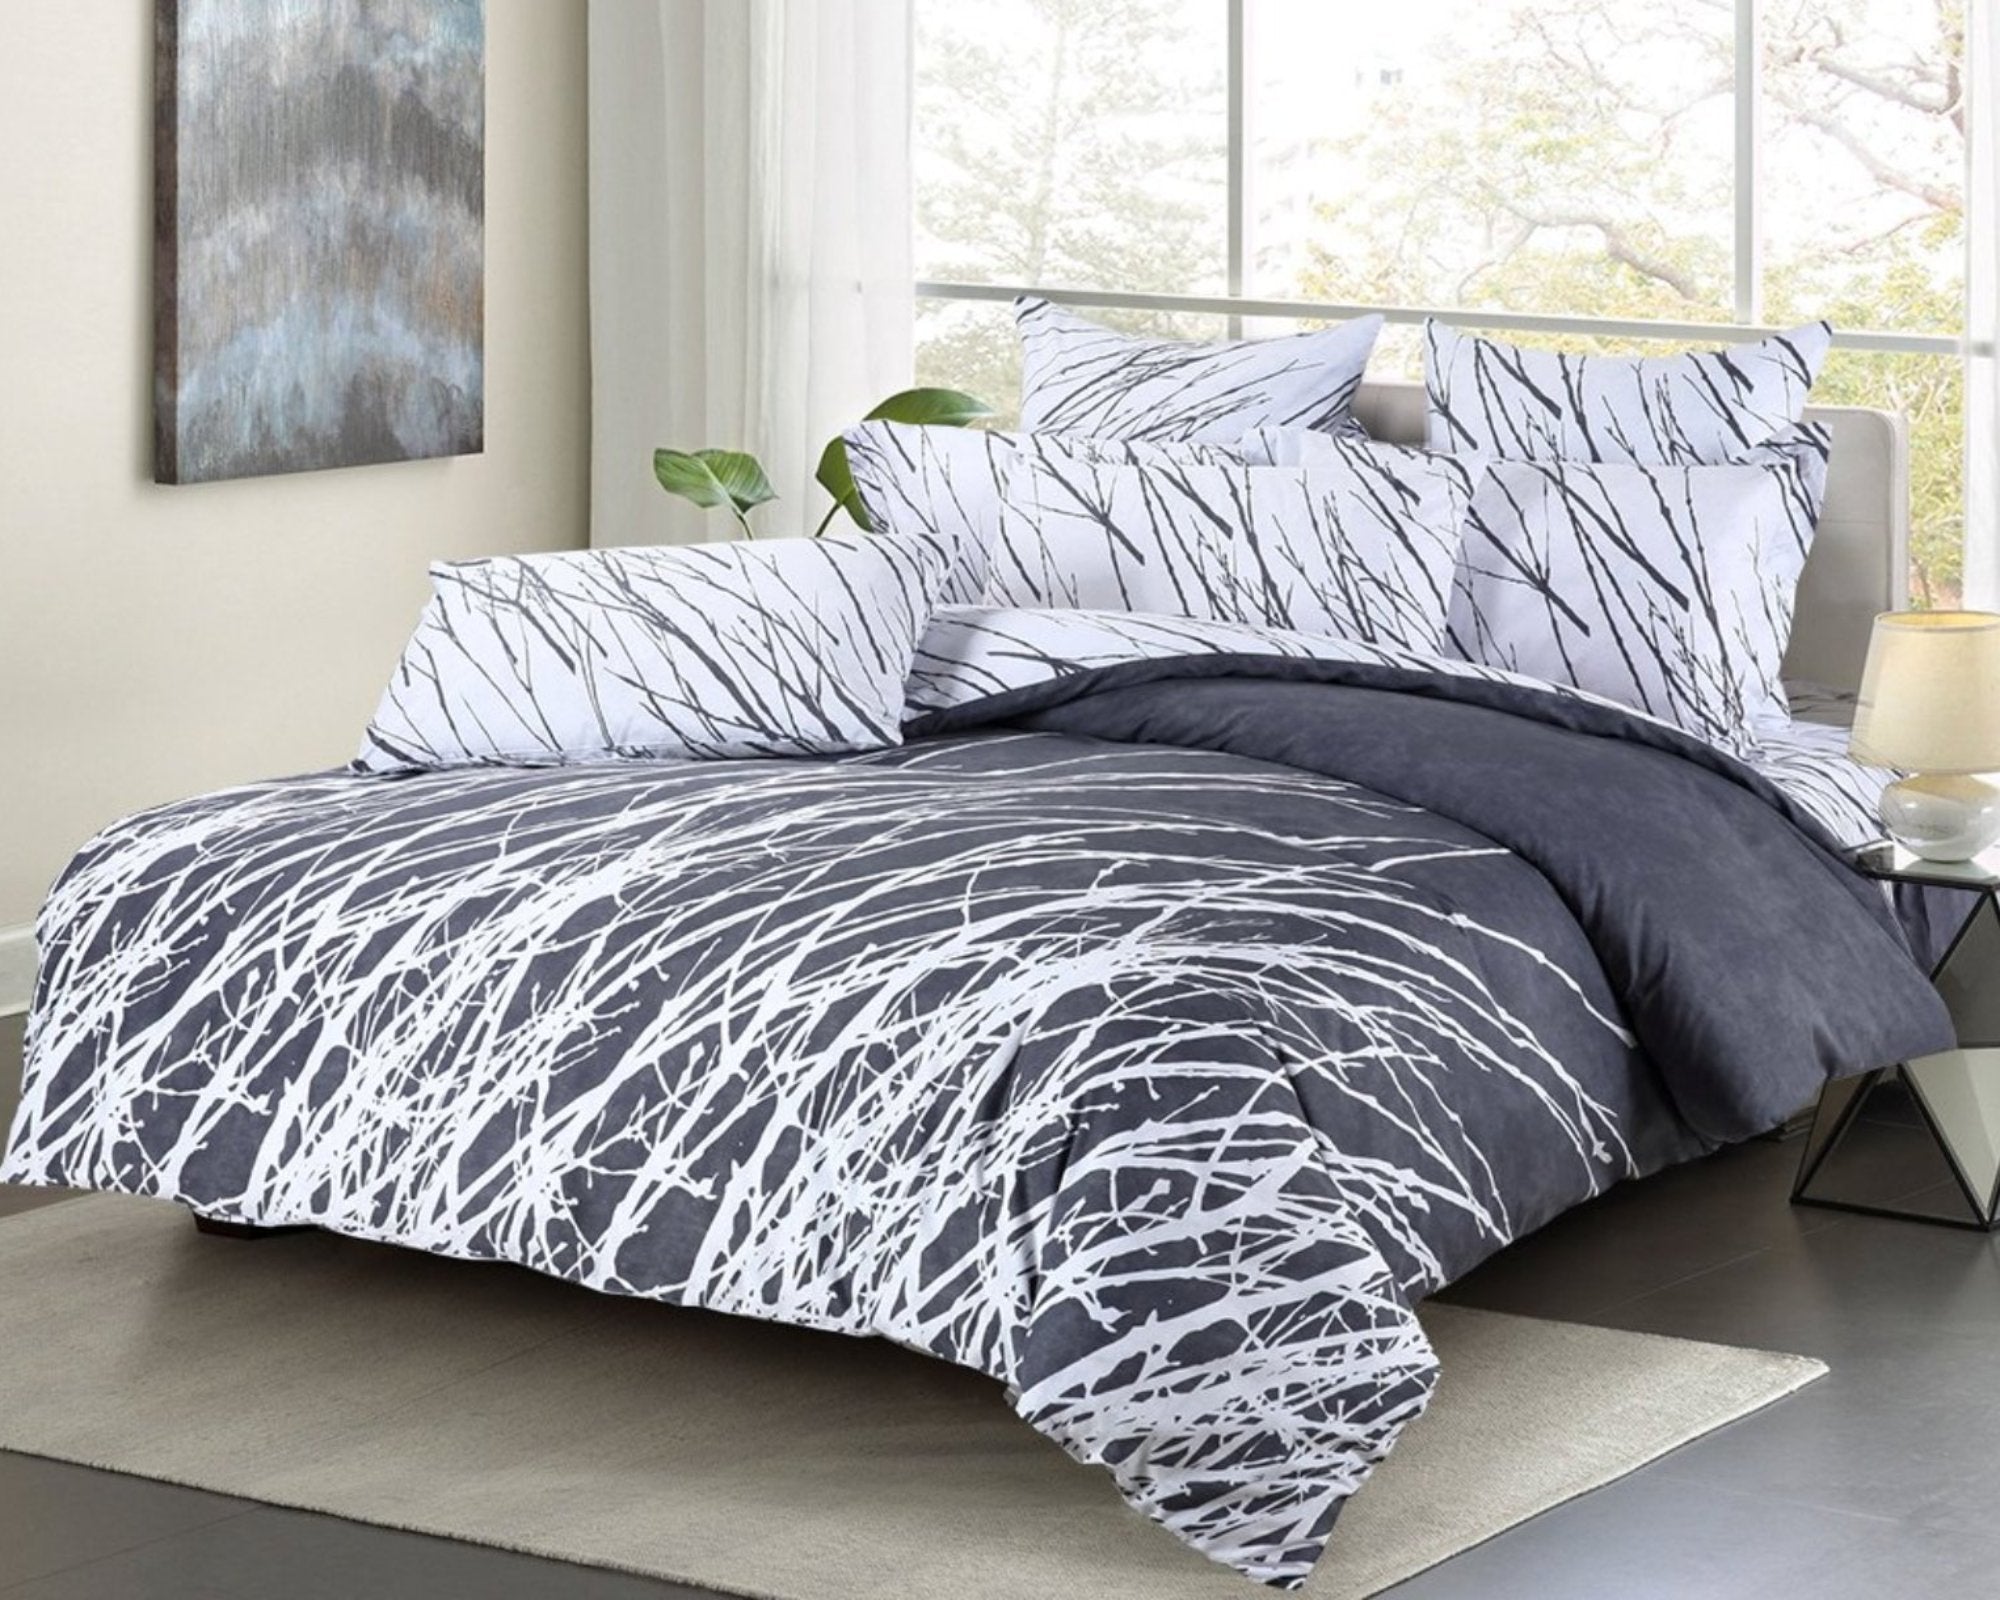 Tree Branches 100% Cotton Bedding Set: Duvet Cover and Pillow